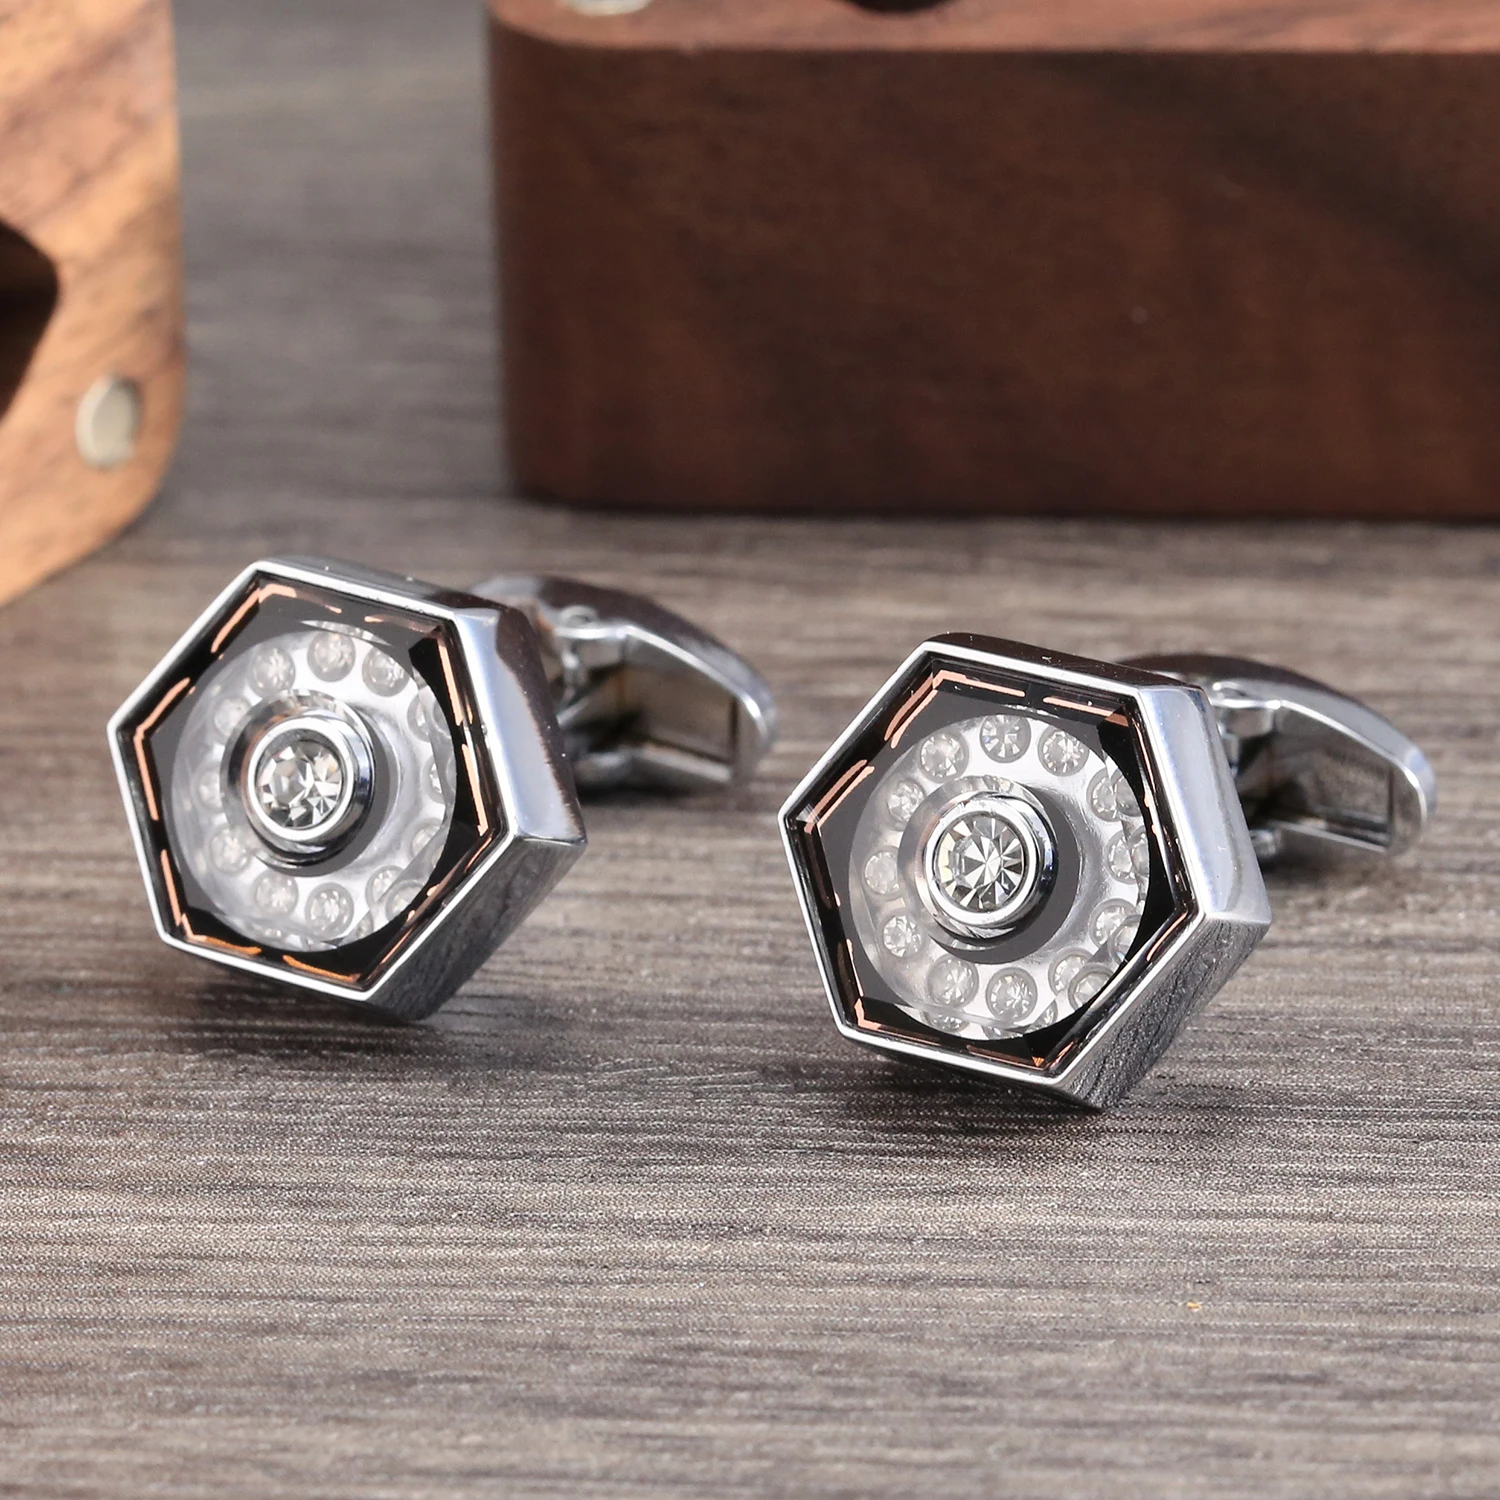 

New Fashion Geometry Crystal French Shirt Cufflinks For Mens Father Jewelry Gifts Rhinestones Buttons Wedding Groom Favors